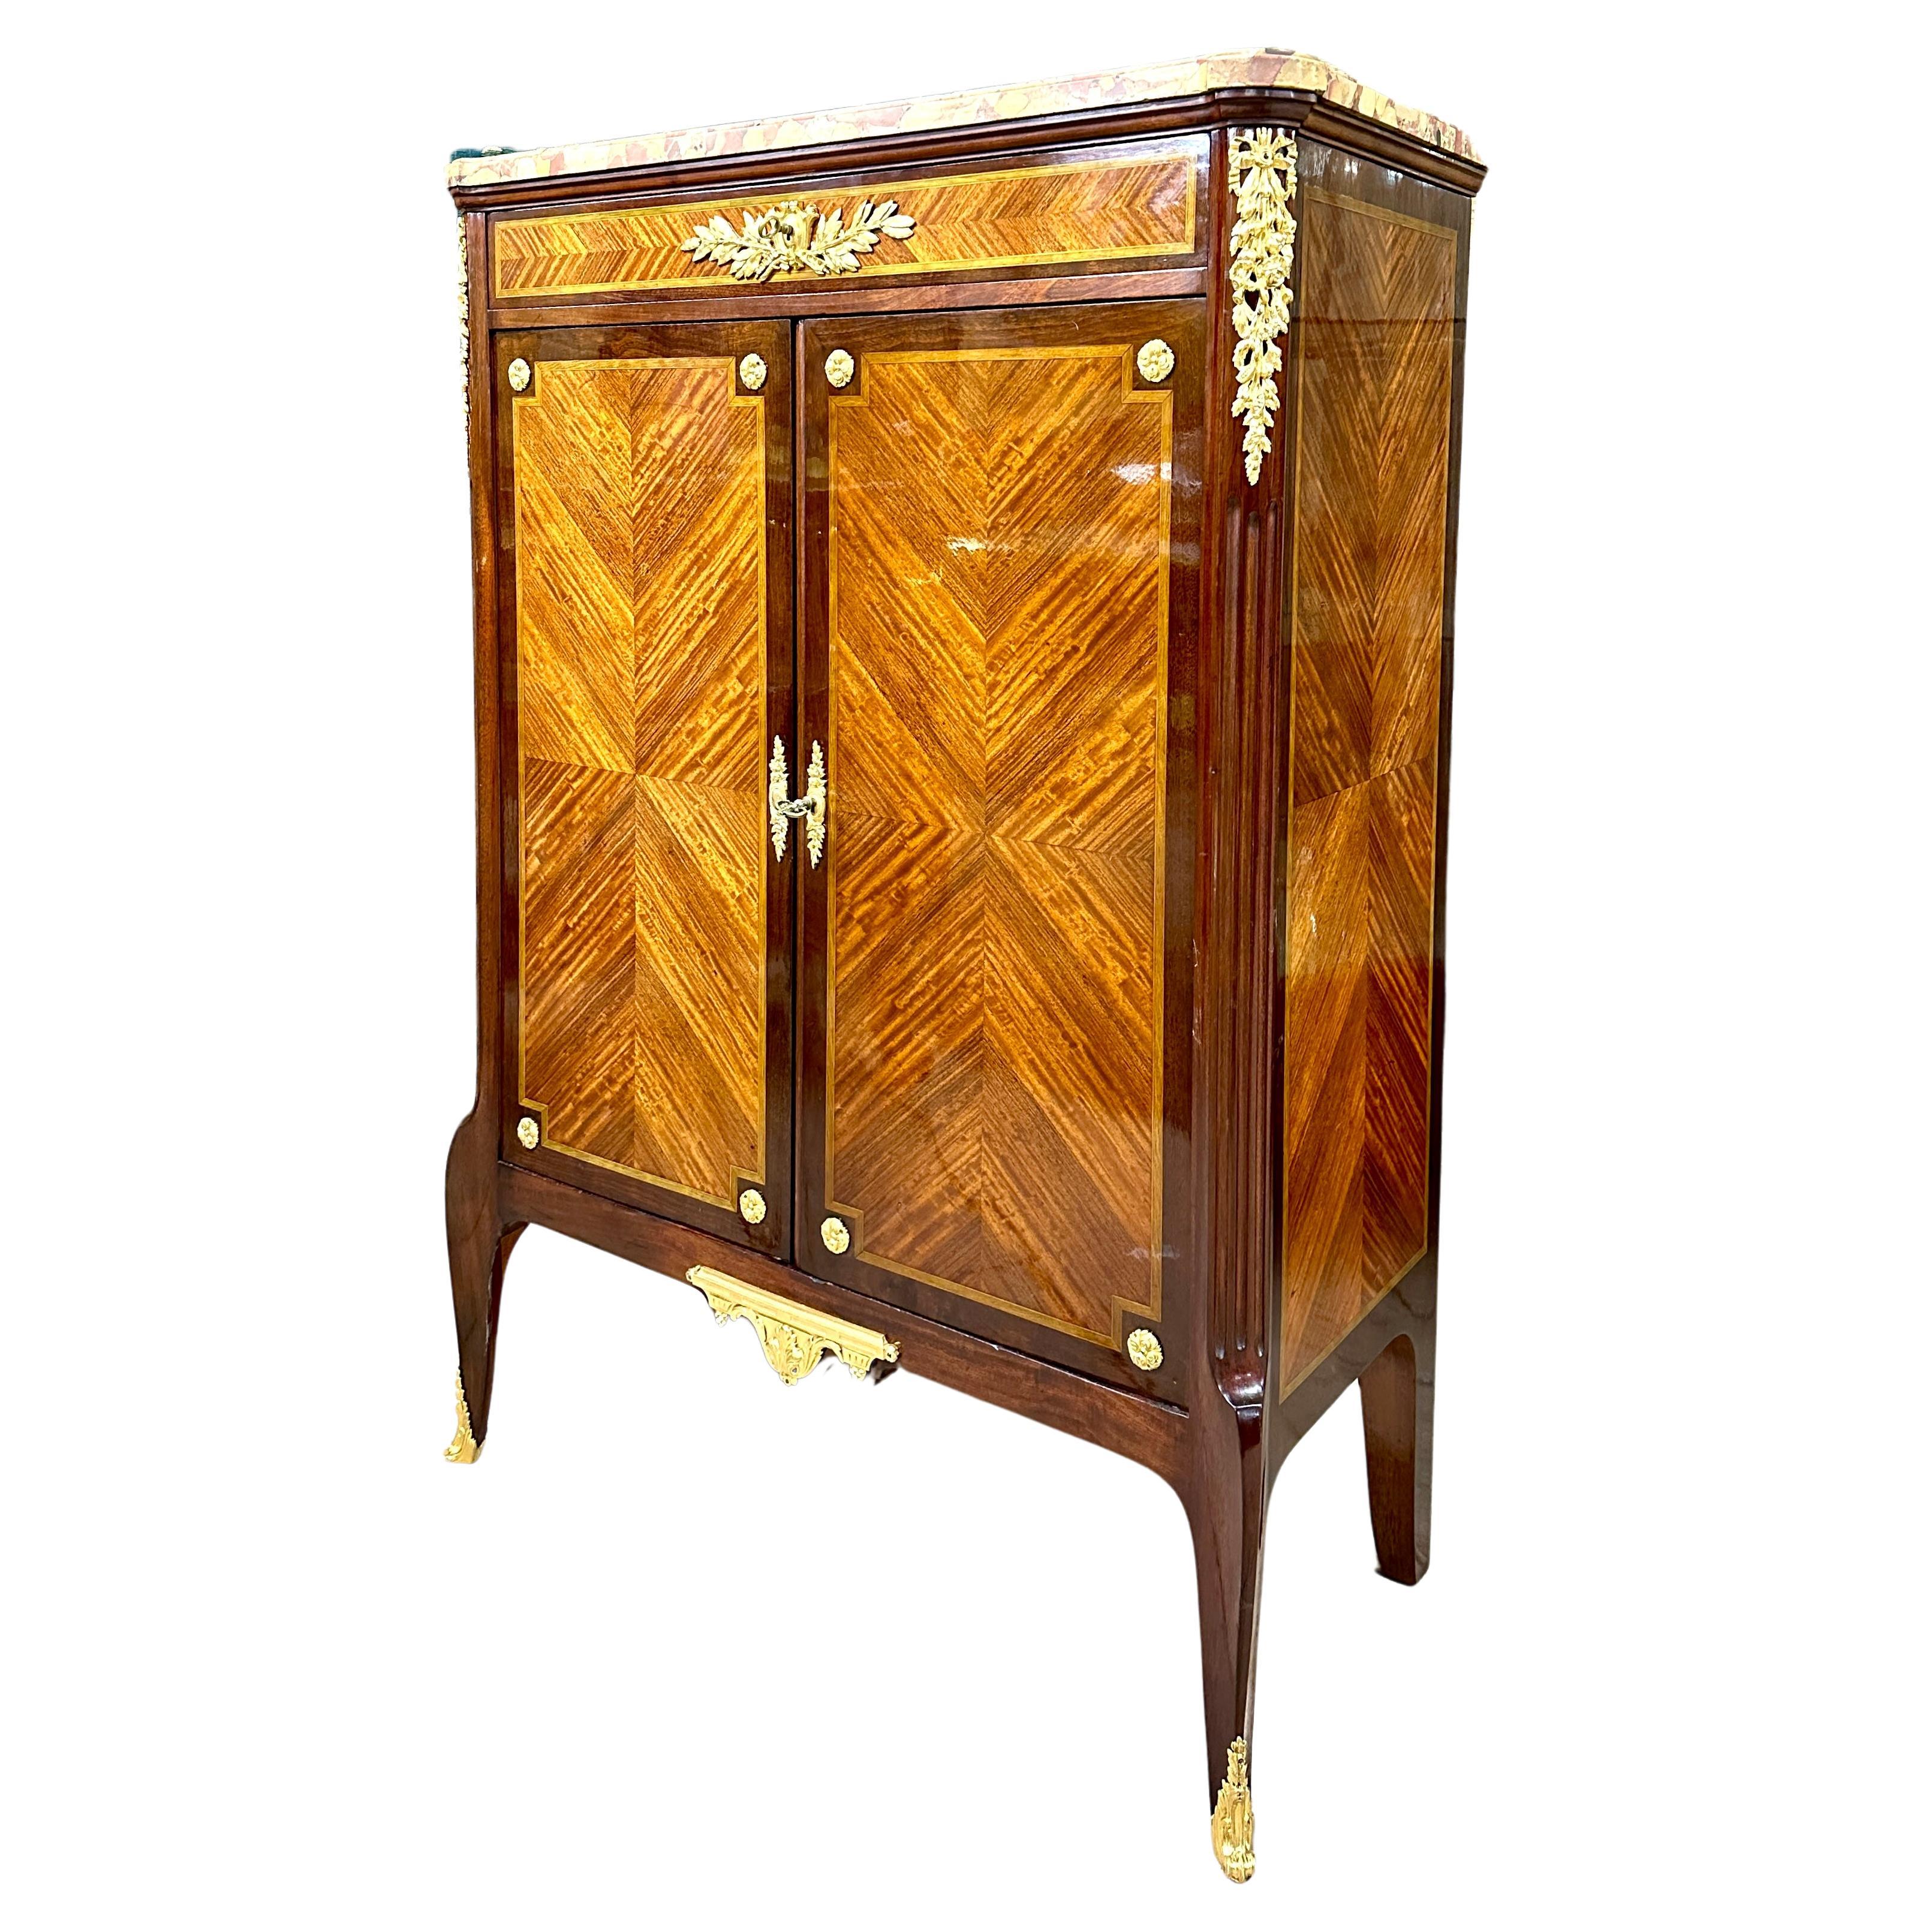 Paul Sormani - Marquetry cabinet, Gilt Bronze From Napoleon III Period, signed